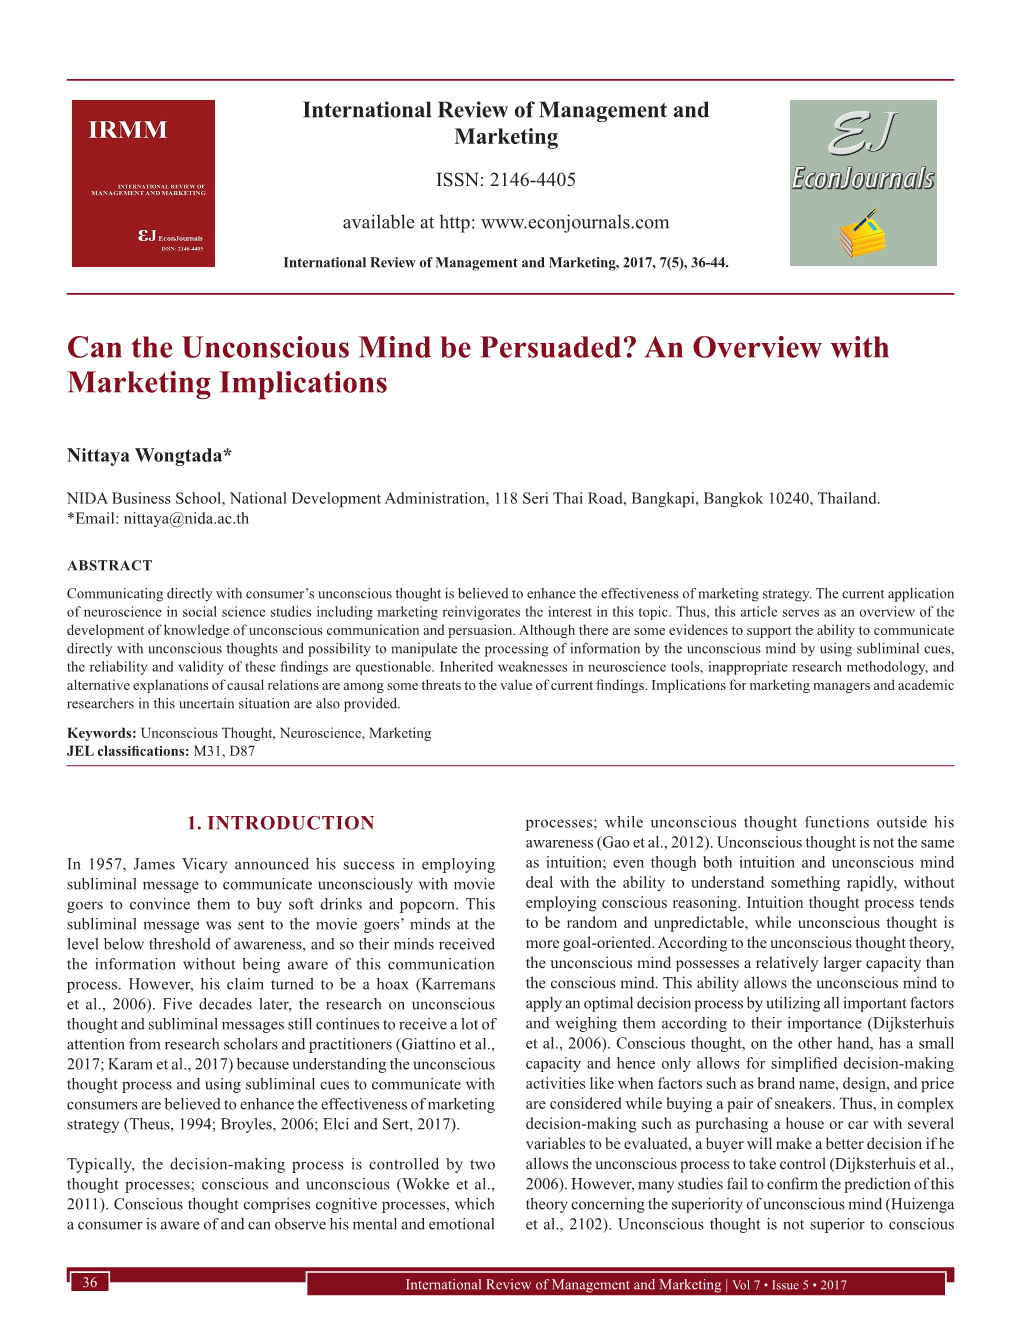 Can the Unconscious Mind Be Persuaded? an Overview with Marketing Implications